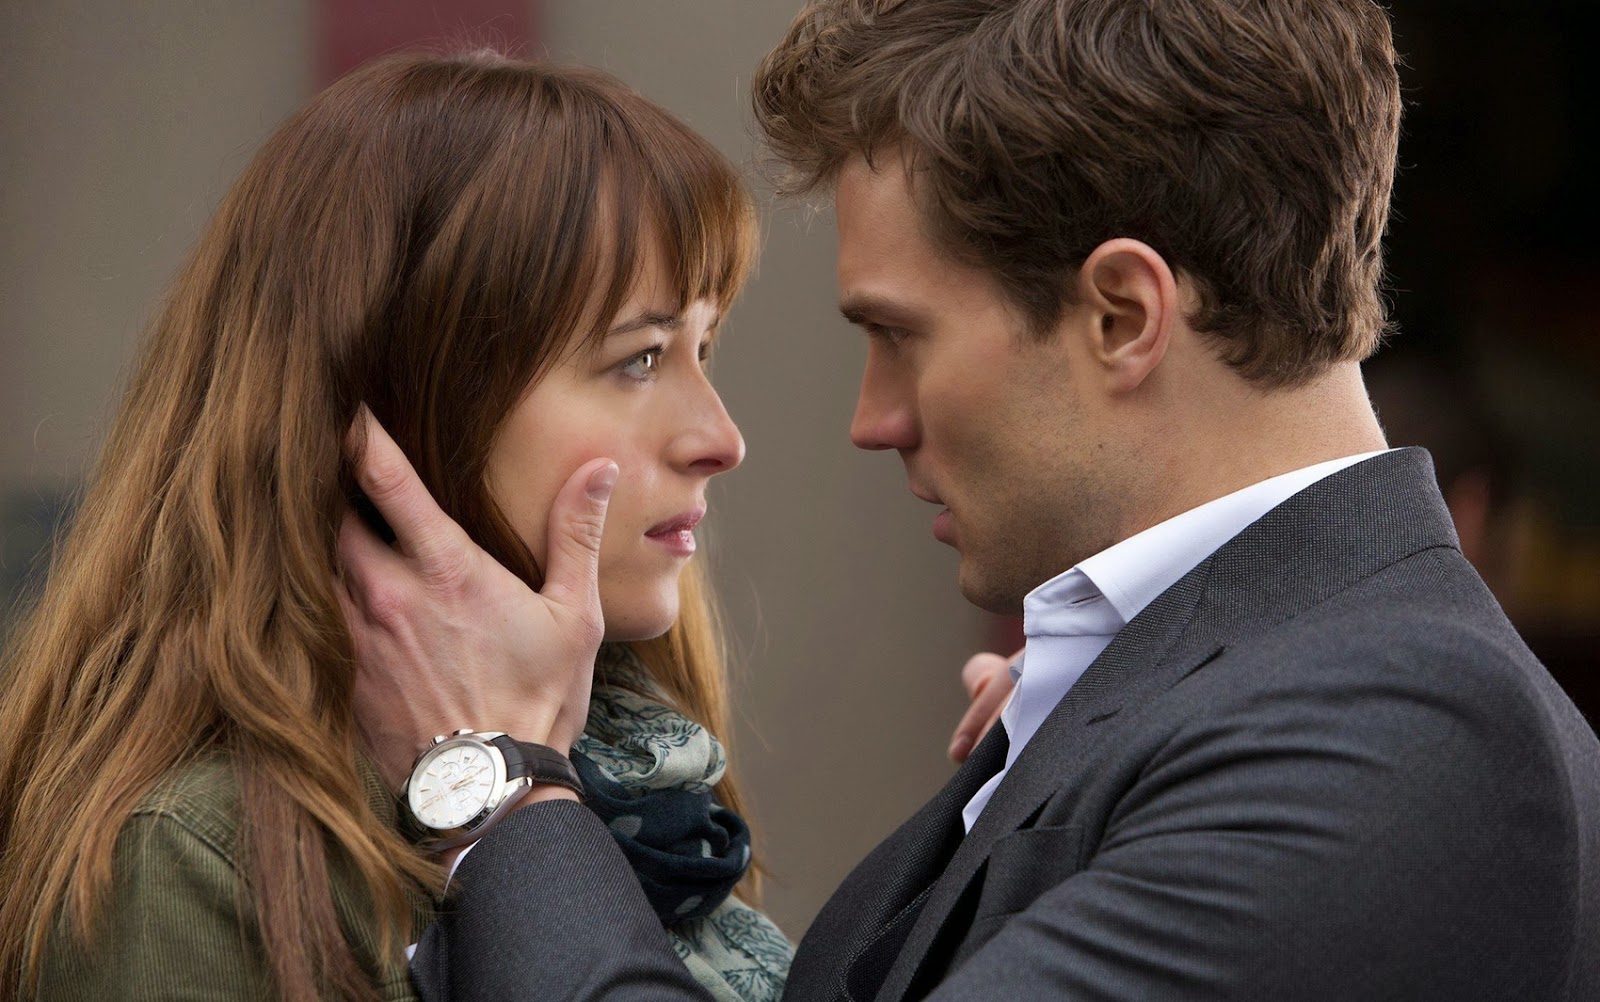 Dell on Movies: Fifty Shades of Grey